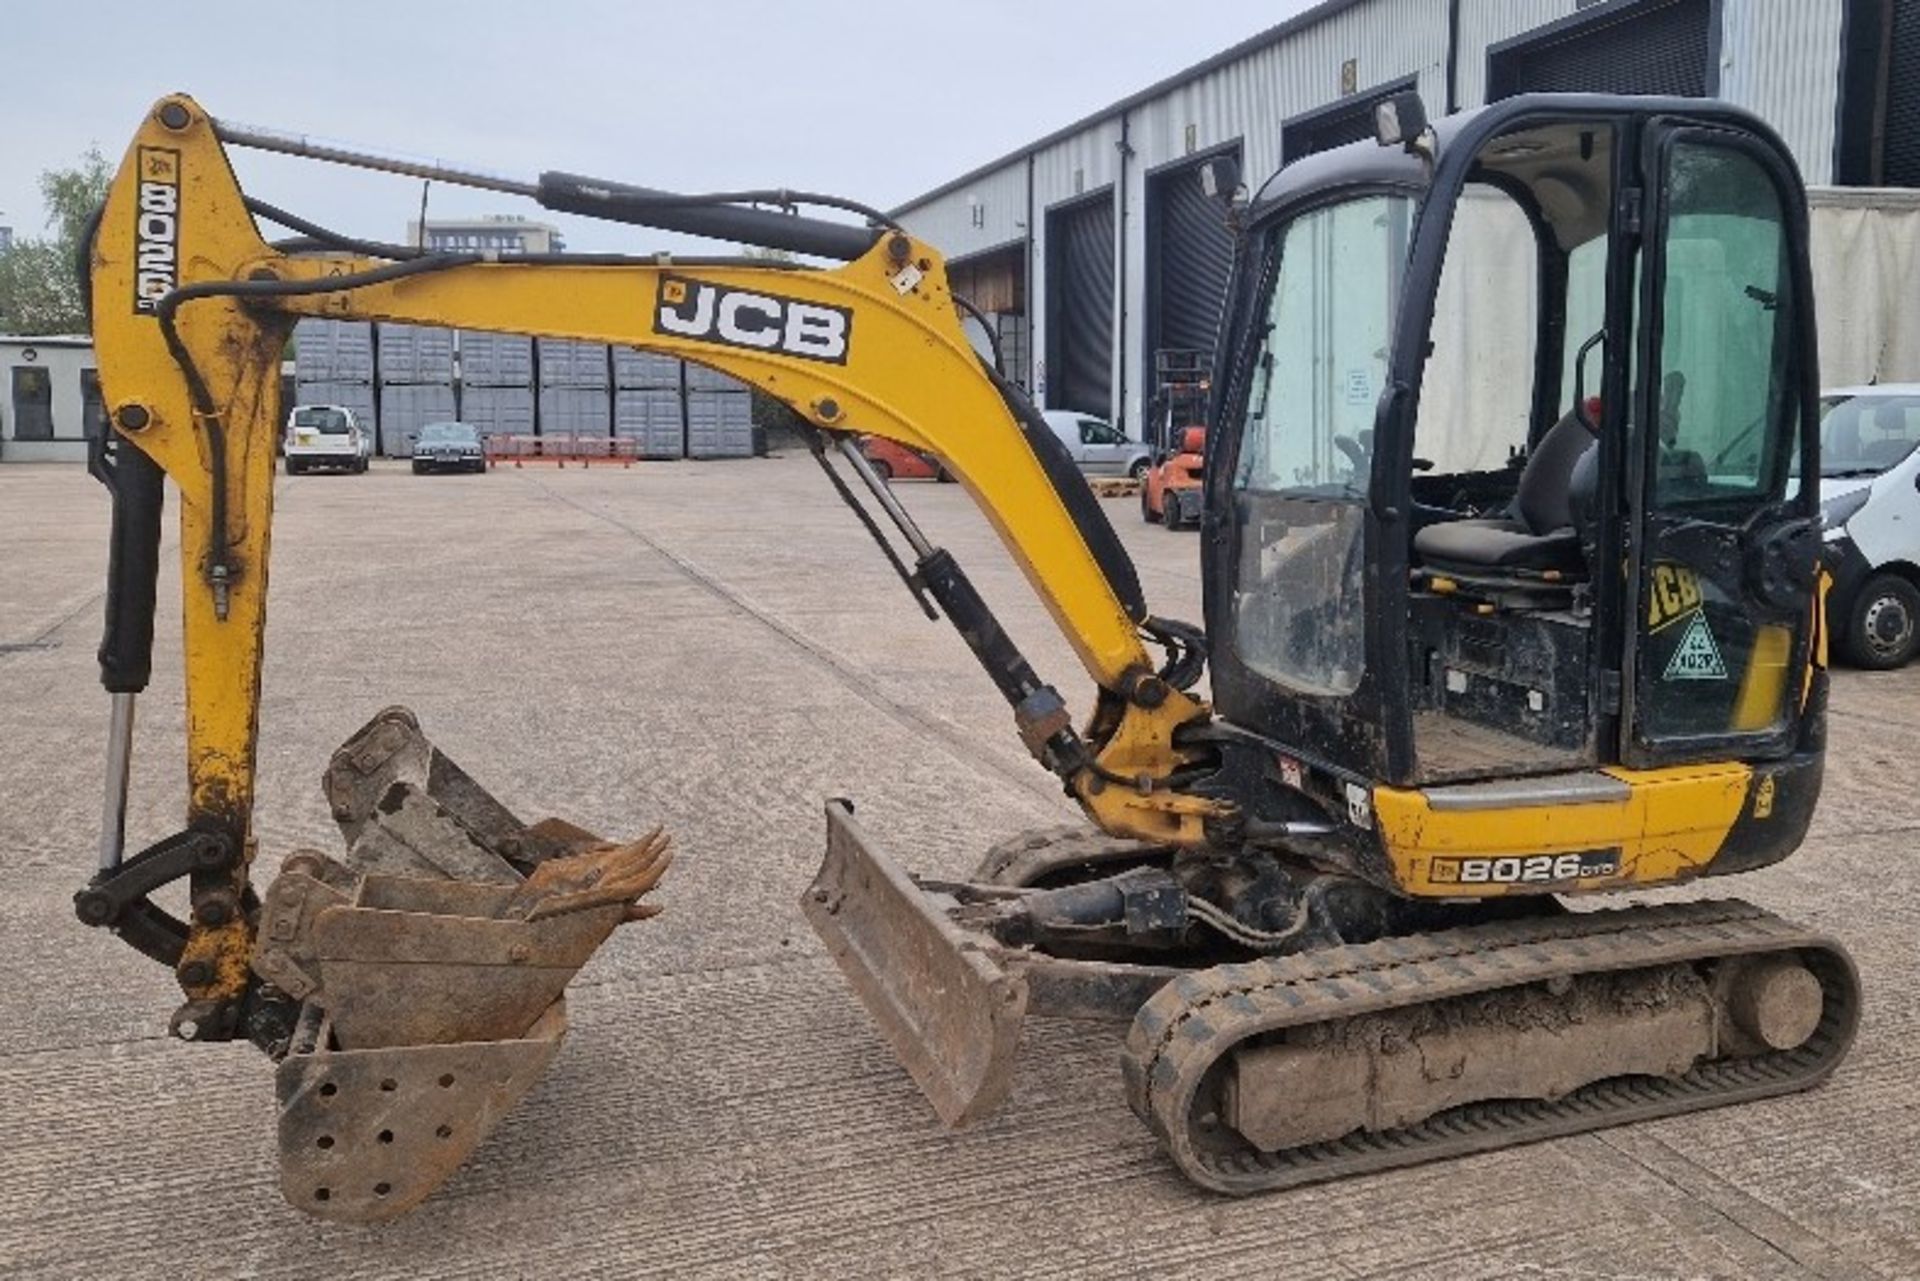 JCB 8026 CTS RUBBER TRACKED MINI EXCAVATOR WITH 3 BUCKETS, HRS 3213.8, YEAR 2017, SERIAL NUMBER